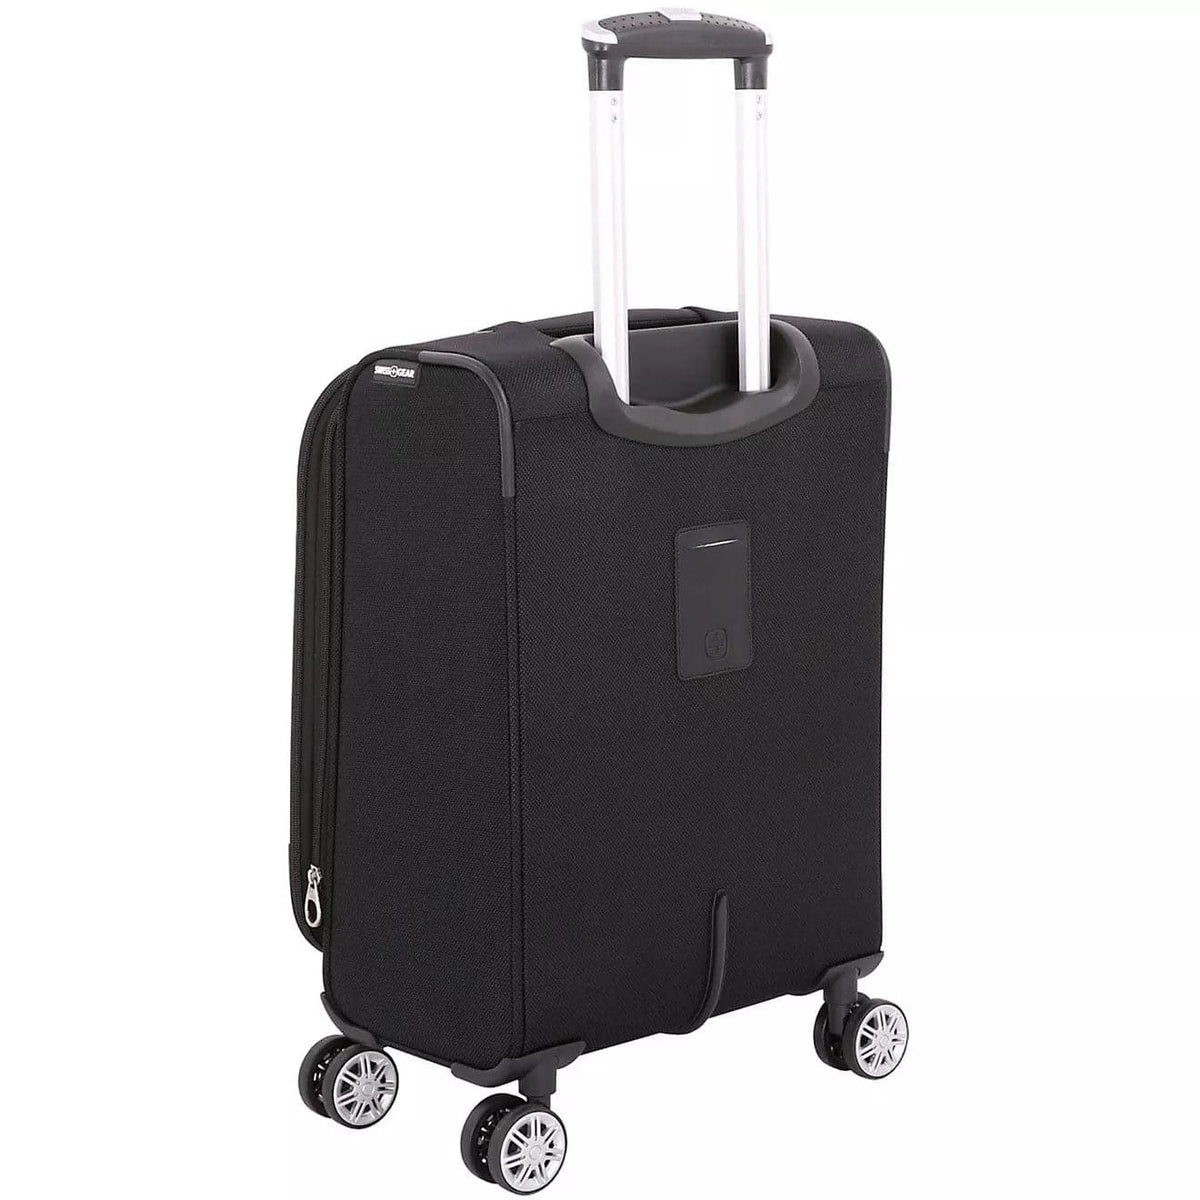 SwissGear Spinner Carry-On Luggage